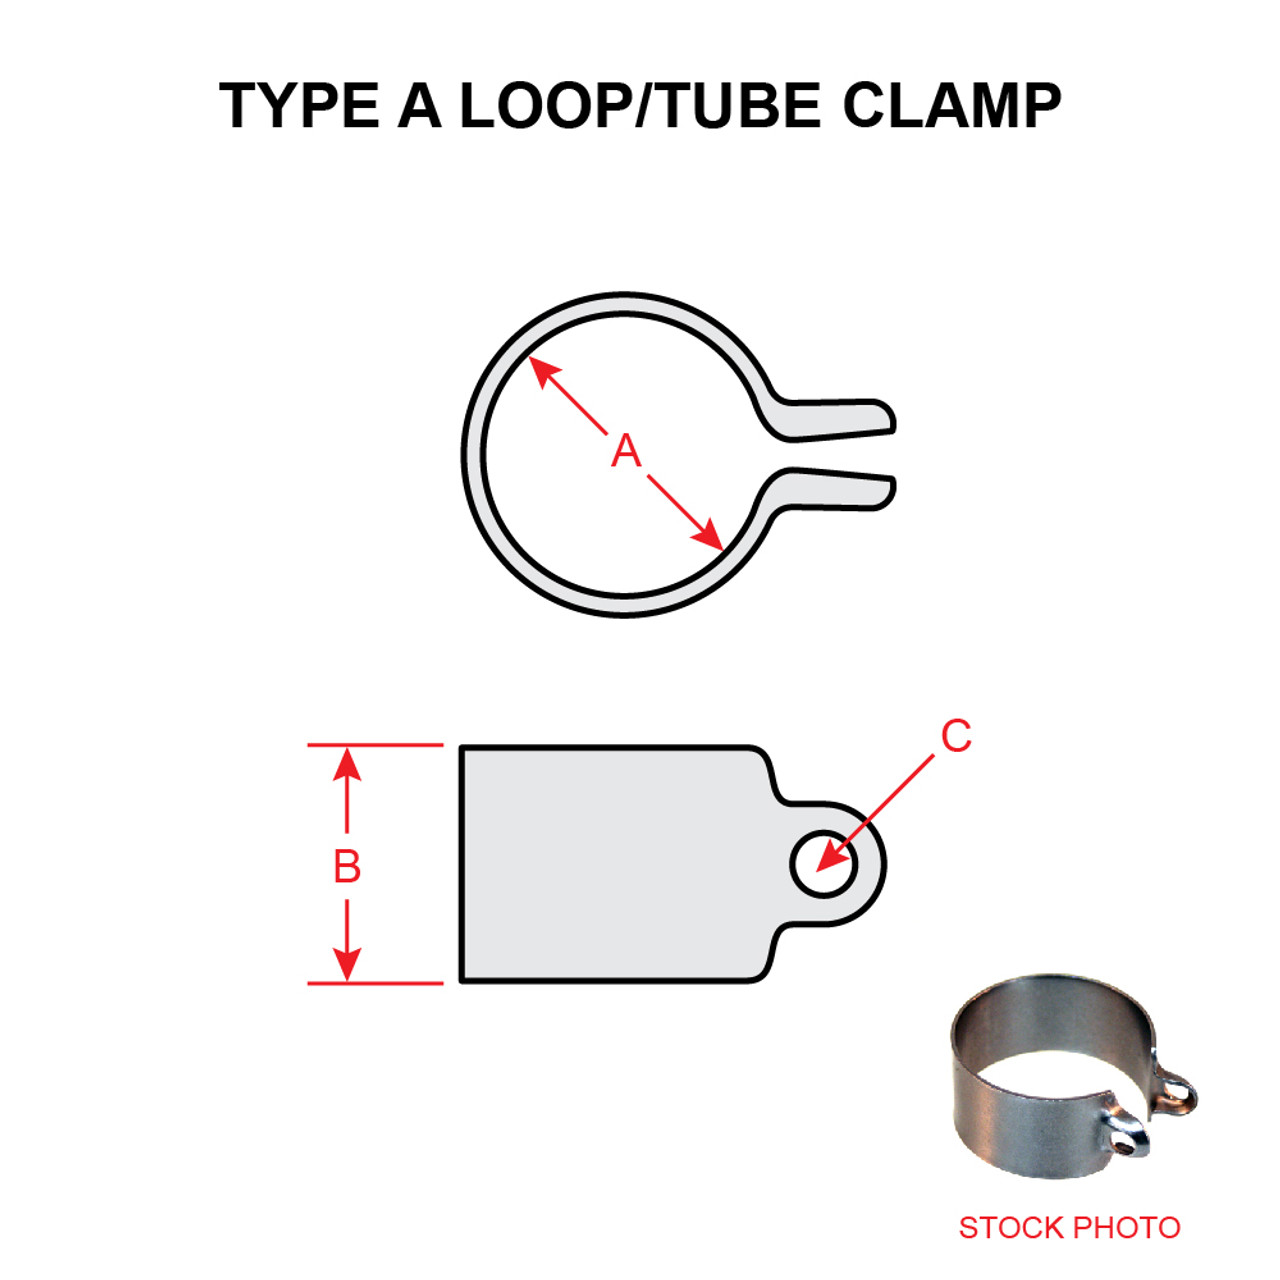 MS27405-18   LOOP CLAMP - TYPE A